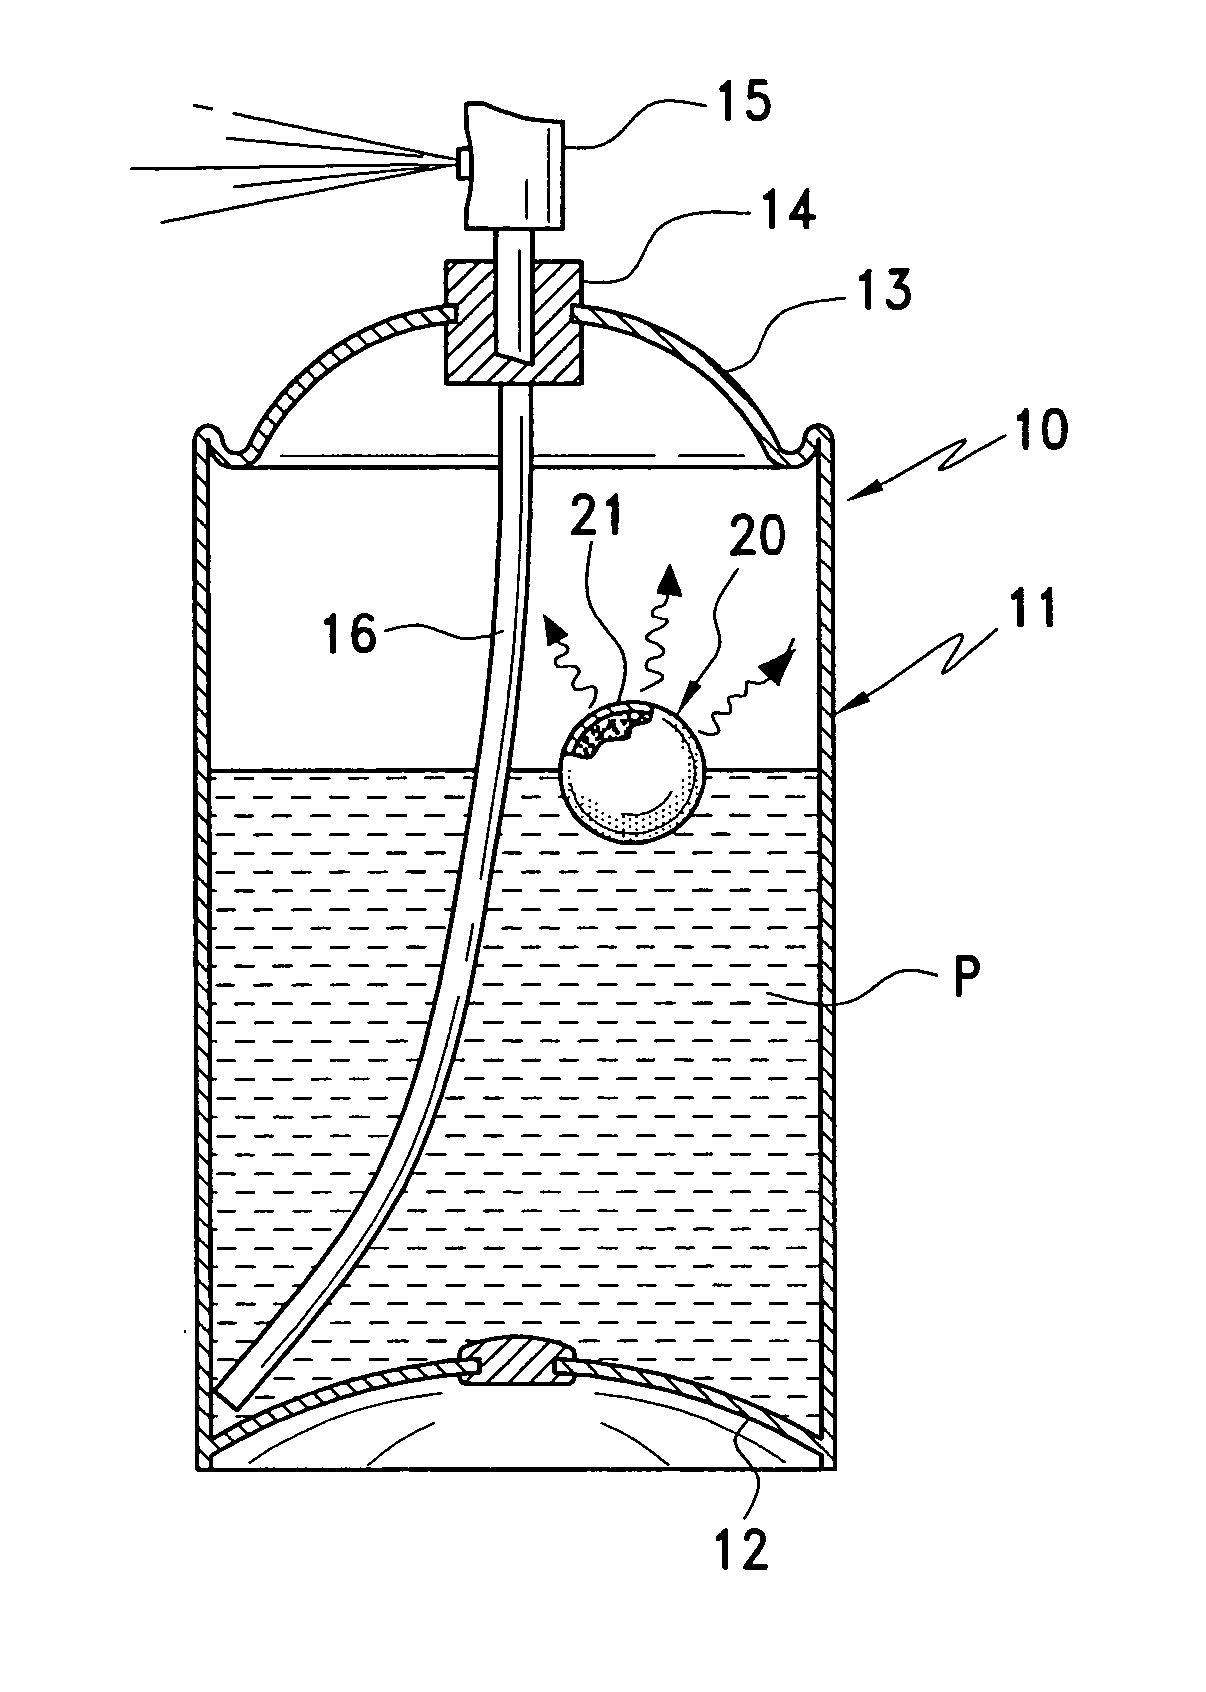 System and method for providing a reserve supply of gas in a pressurized container